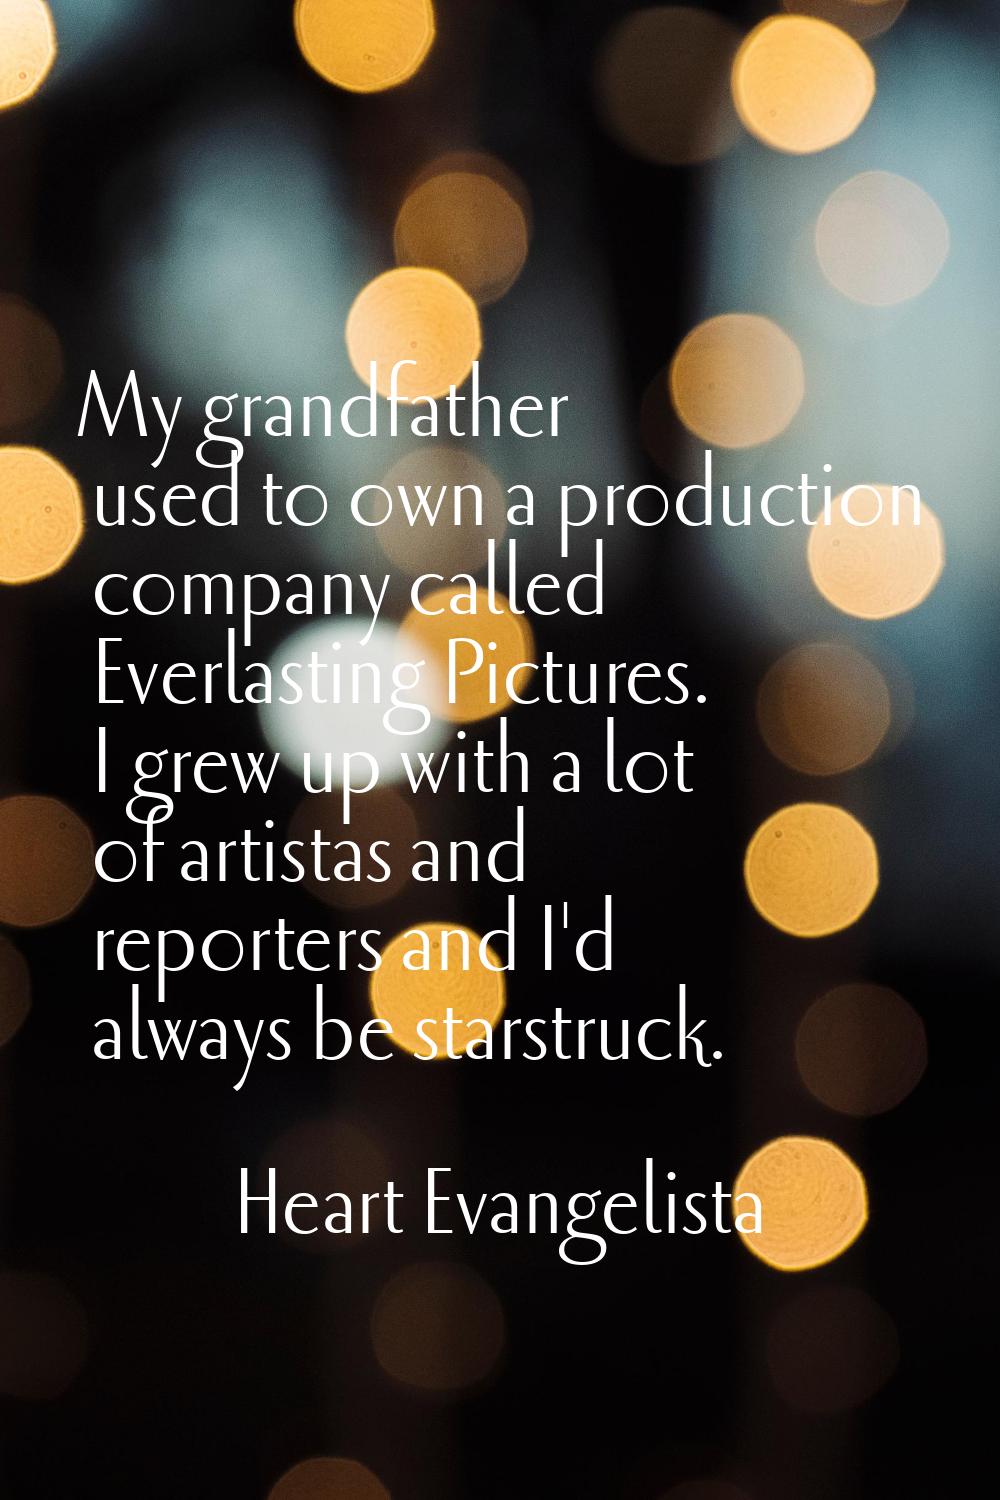 My grandfather used to own a production company called Everlasting Pictures. I grew up with a lot o